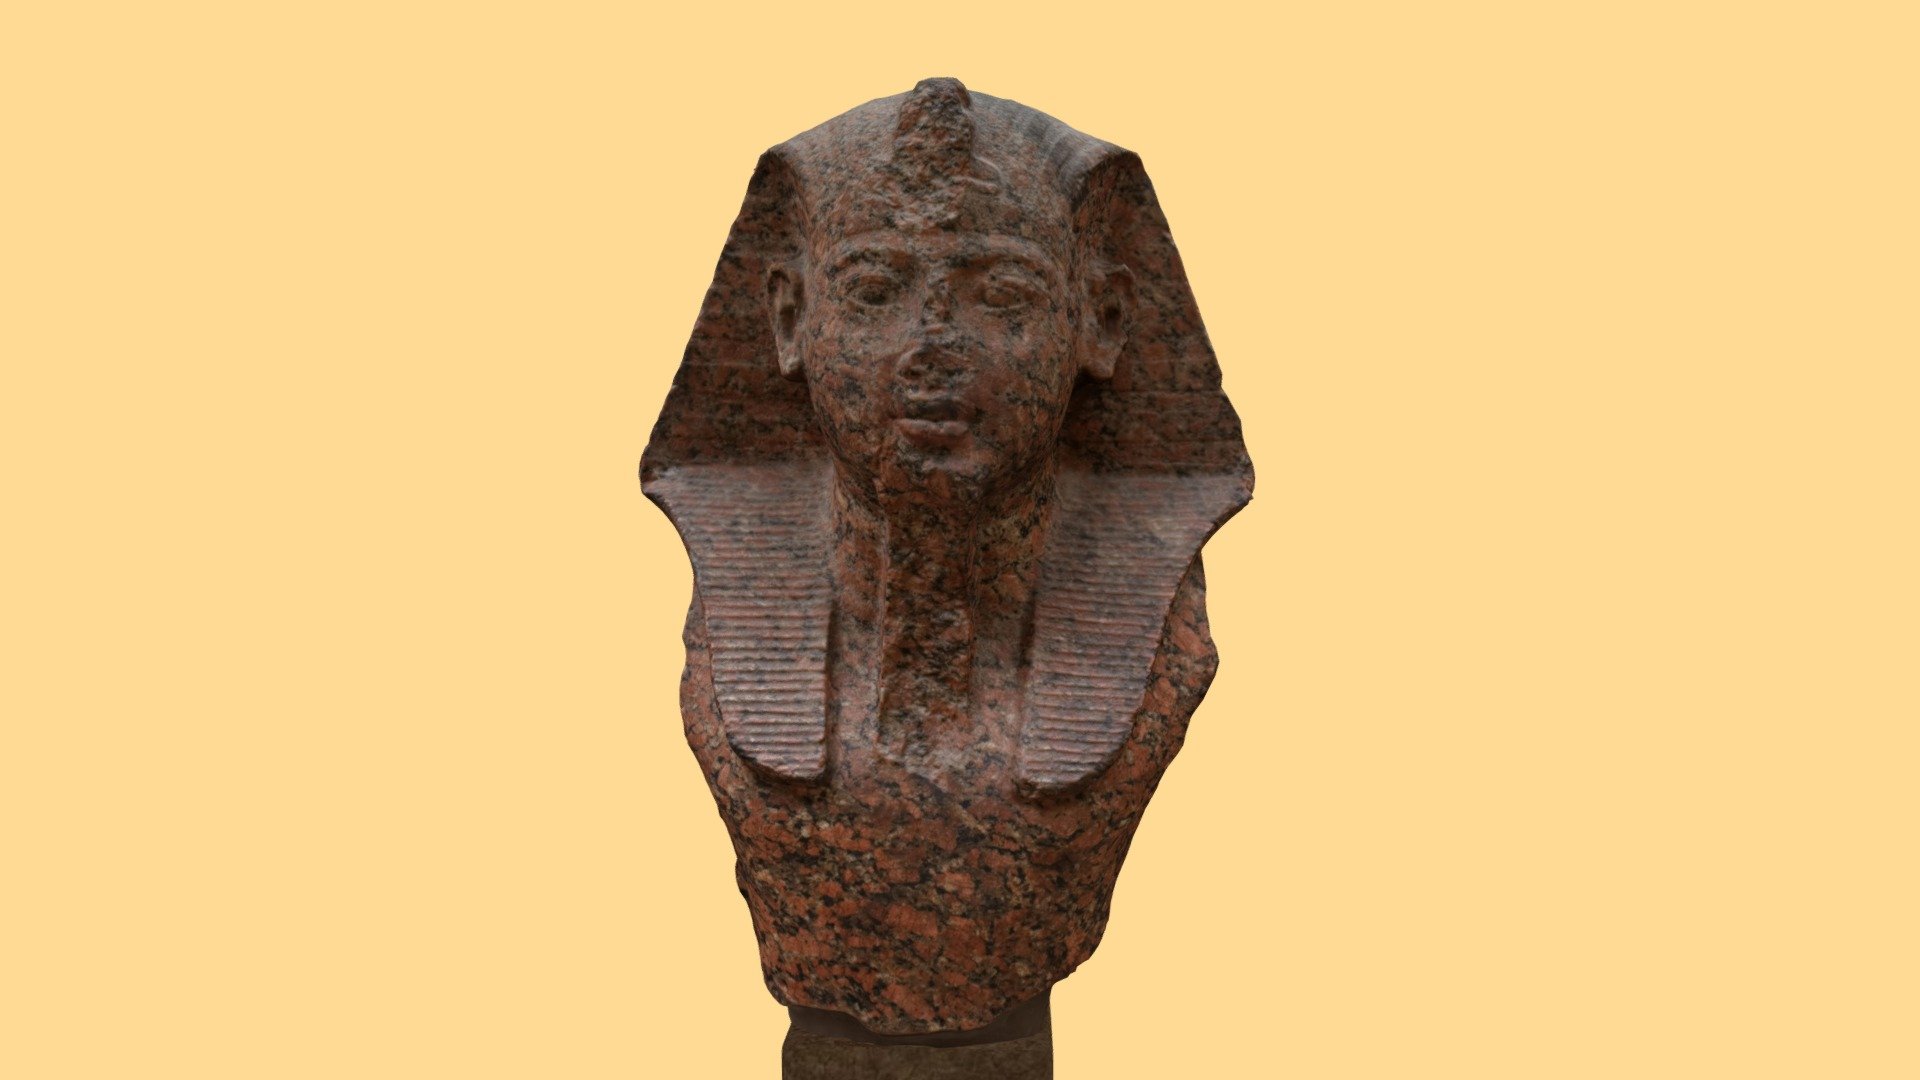 Made with a remote dataset with many blurry and not sharp photos.
Creation process was focused on reducing the blur and sharpness using deep learning models to improve quality on the source images.
The same process was applied to the final resulting texture of the model to increase even more the sharpness of it. 

A model of a head of (possibly) Rameses II. This is made of red granite and dates to around 1250 BC.

You can read more about this dynasty here.

Do you want to capture something in 3D?
Write me at riccardoemanuelegiorato@gmail.com - Scan of 19th Dynasty Egyptian Head - Buy Royalty Free 3D model by riccardogiorato 3d model